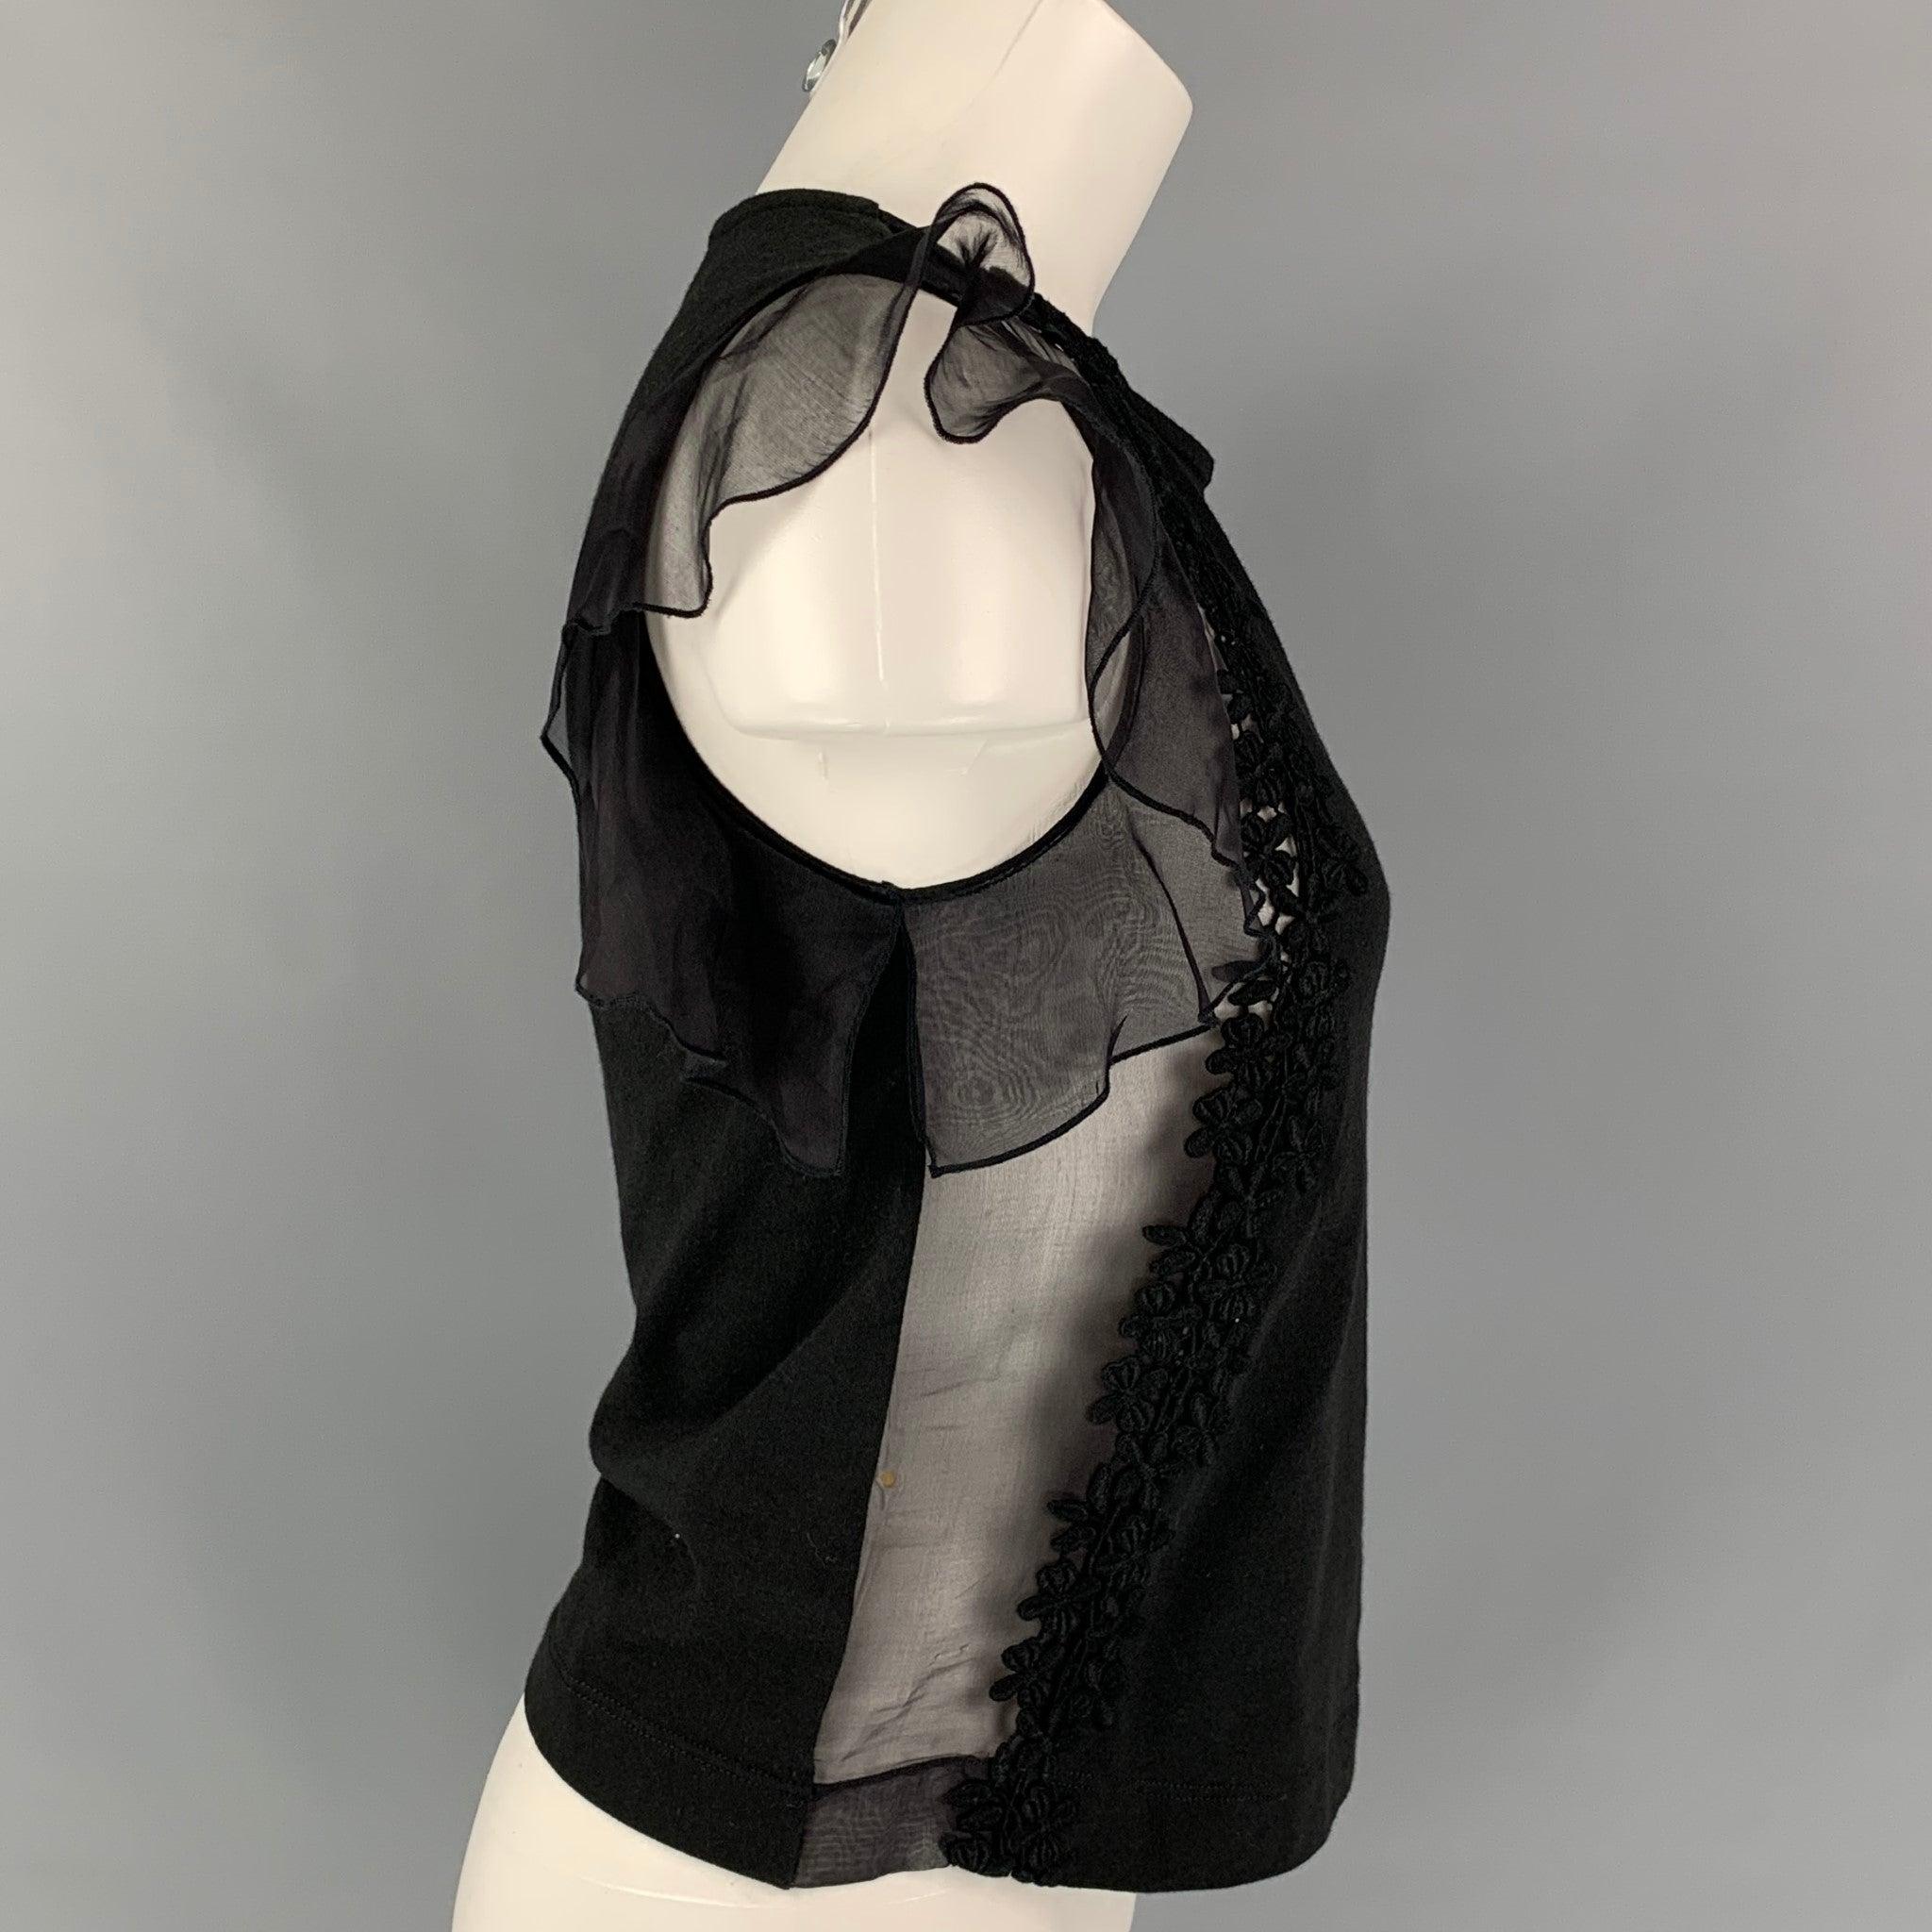 GIAMBATTISTA VALLI dress top comes in a black cotton / silk featuring a lace trim, embroidered details, sleeveless, and a crew-neck. Made in Italy.
Very Good
Pre-Owned Condition. 

Marked:   38/XXS 

Measurements: 
 
Shoulder: 12.5 inches  Bust: 32